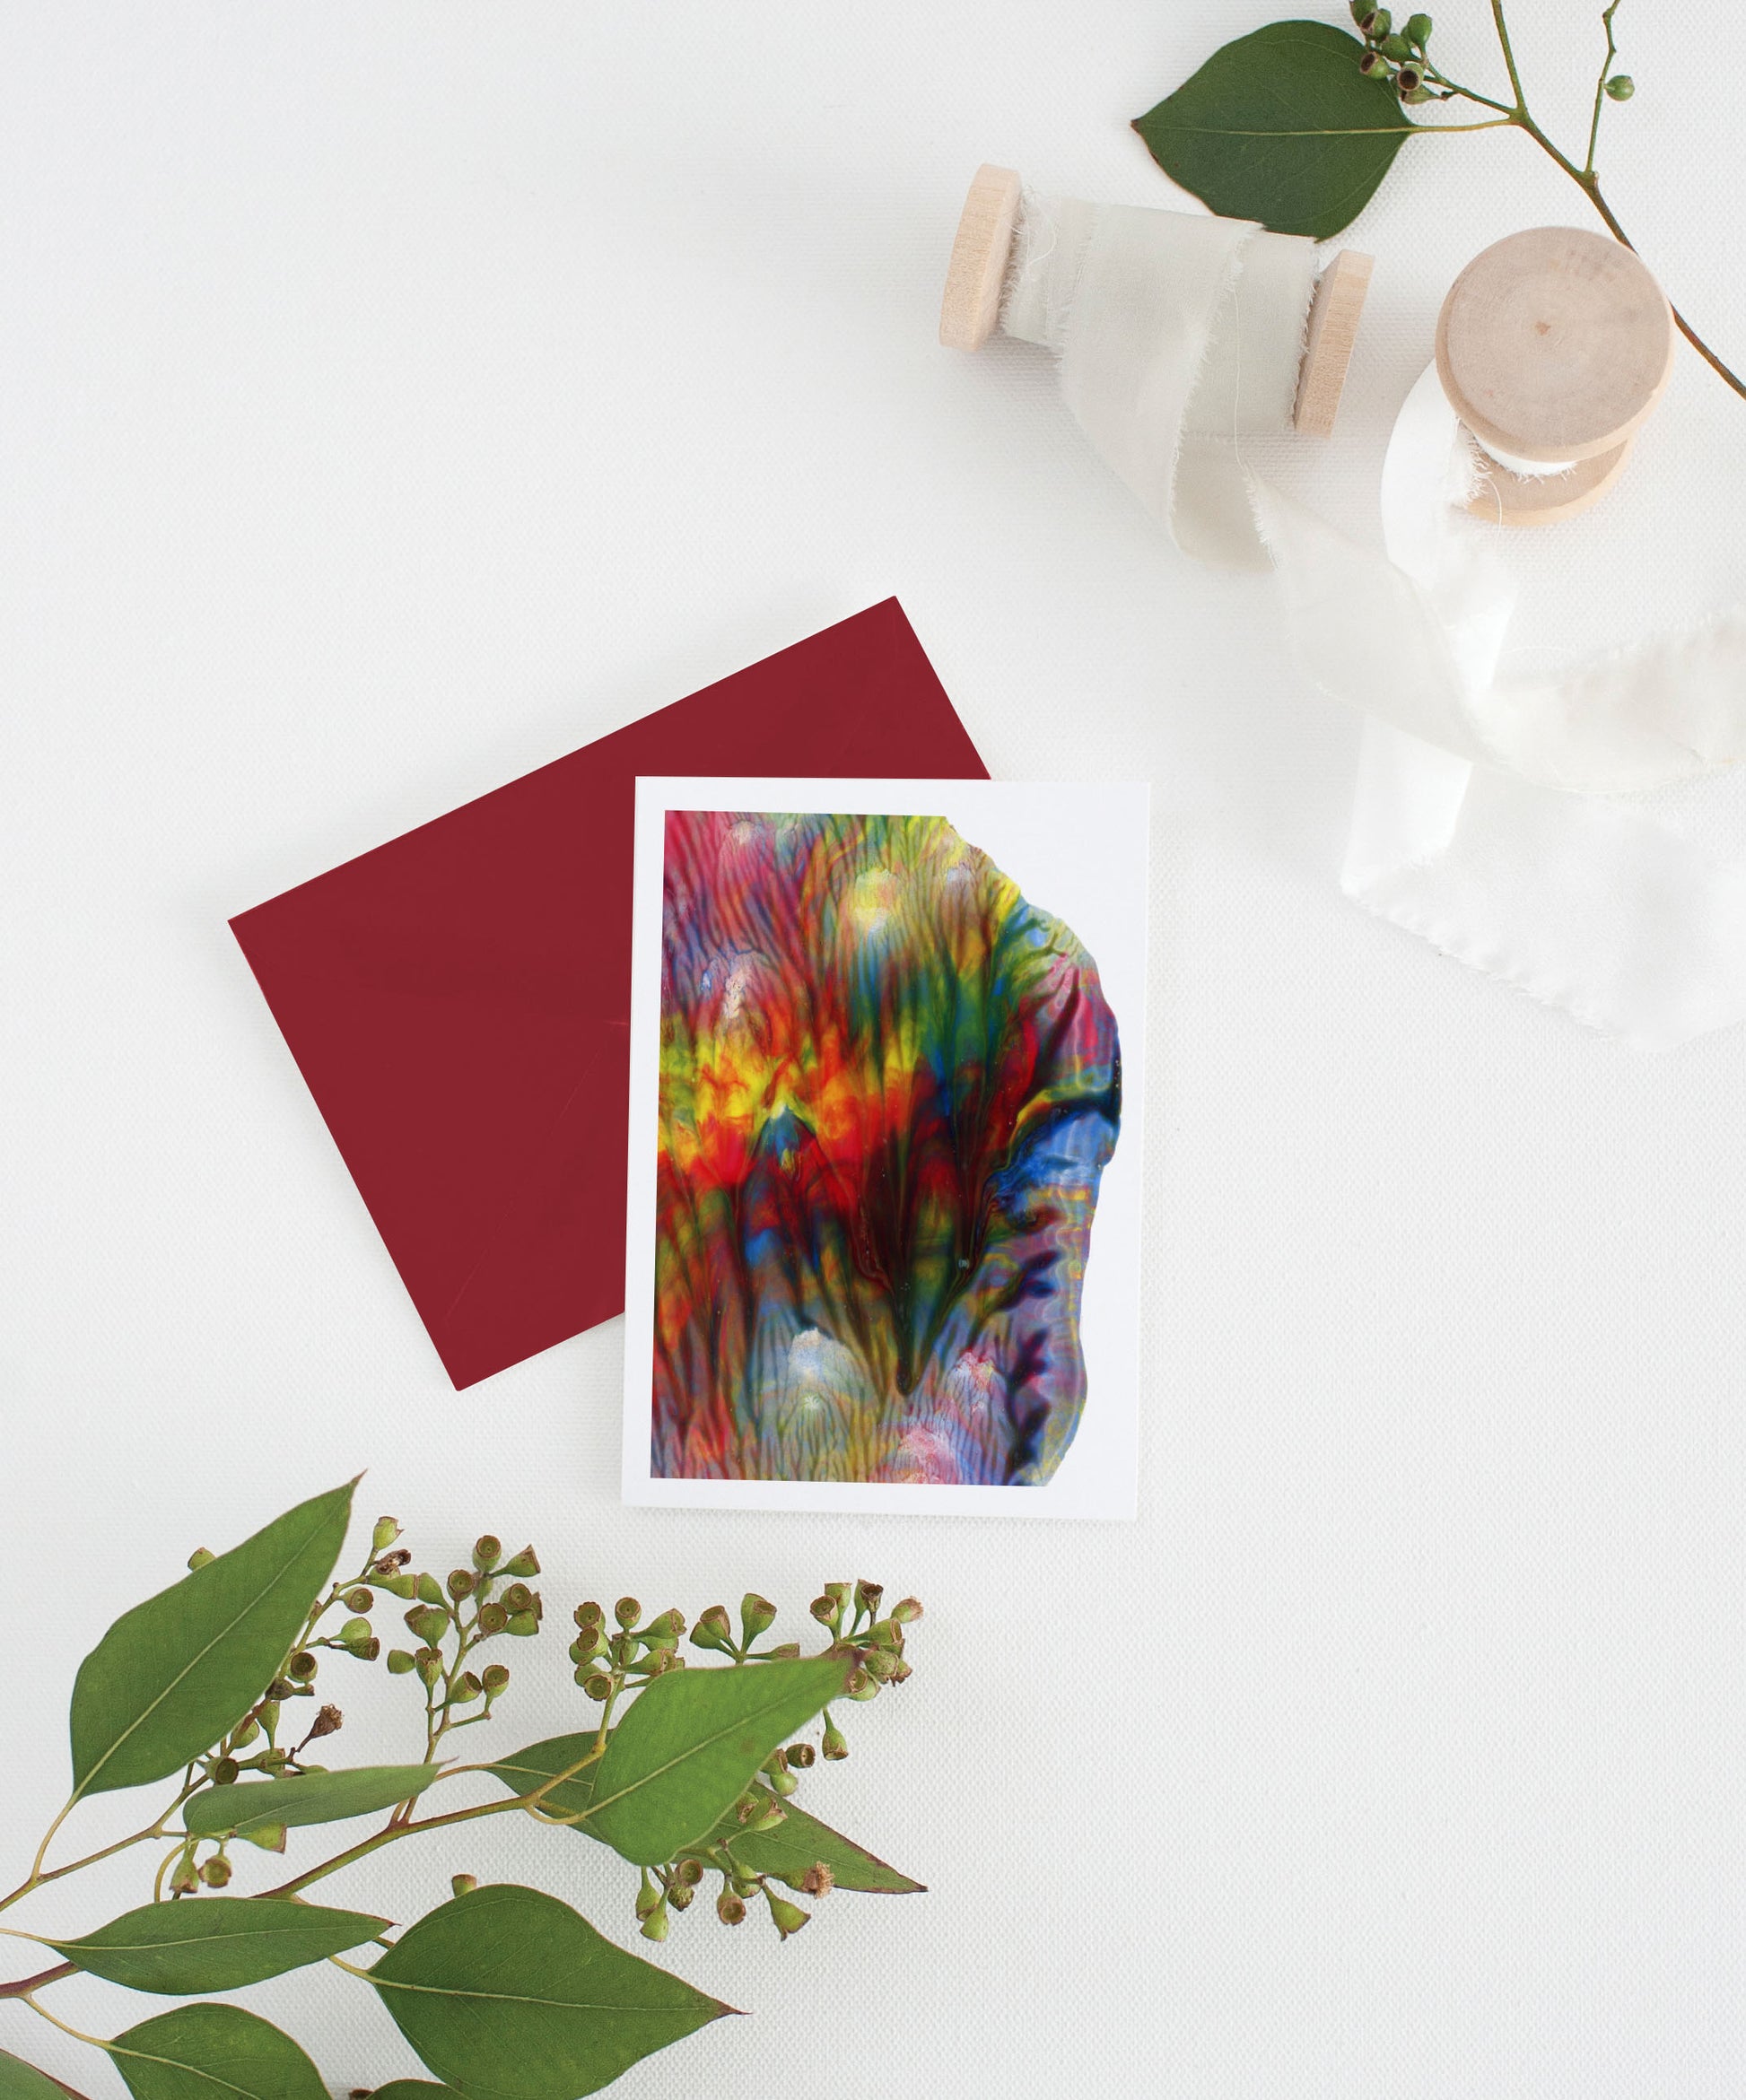 An abstract painting greeting card sits with a red envelope on a white background.  There are leaves and two small spools of white fabric ribbon near it.